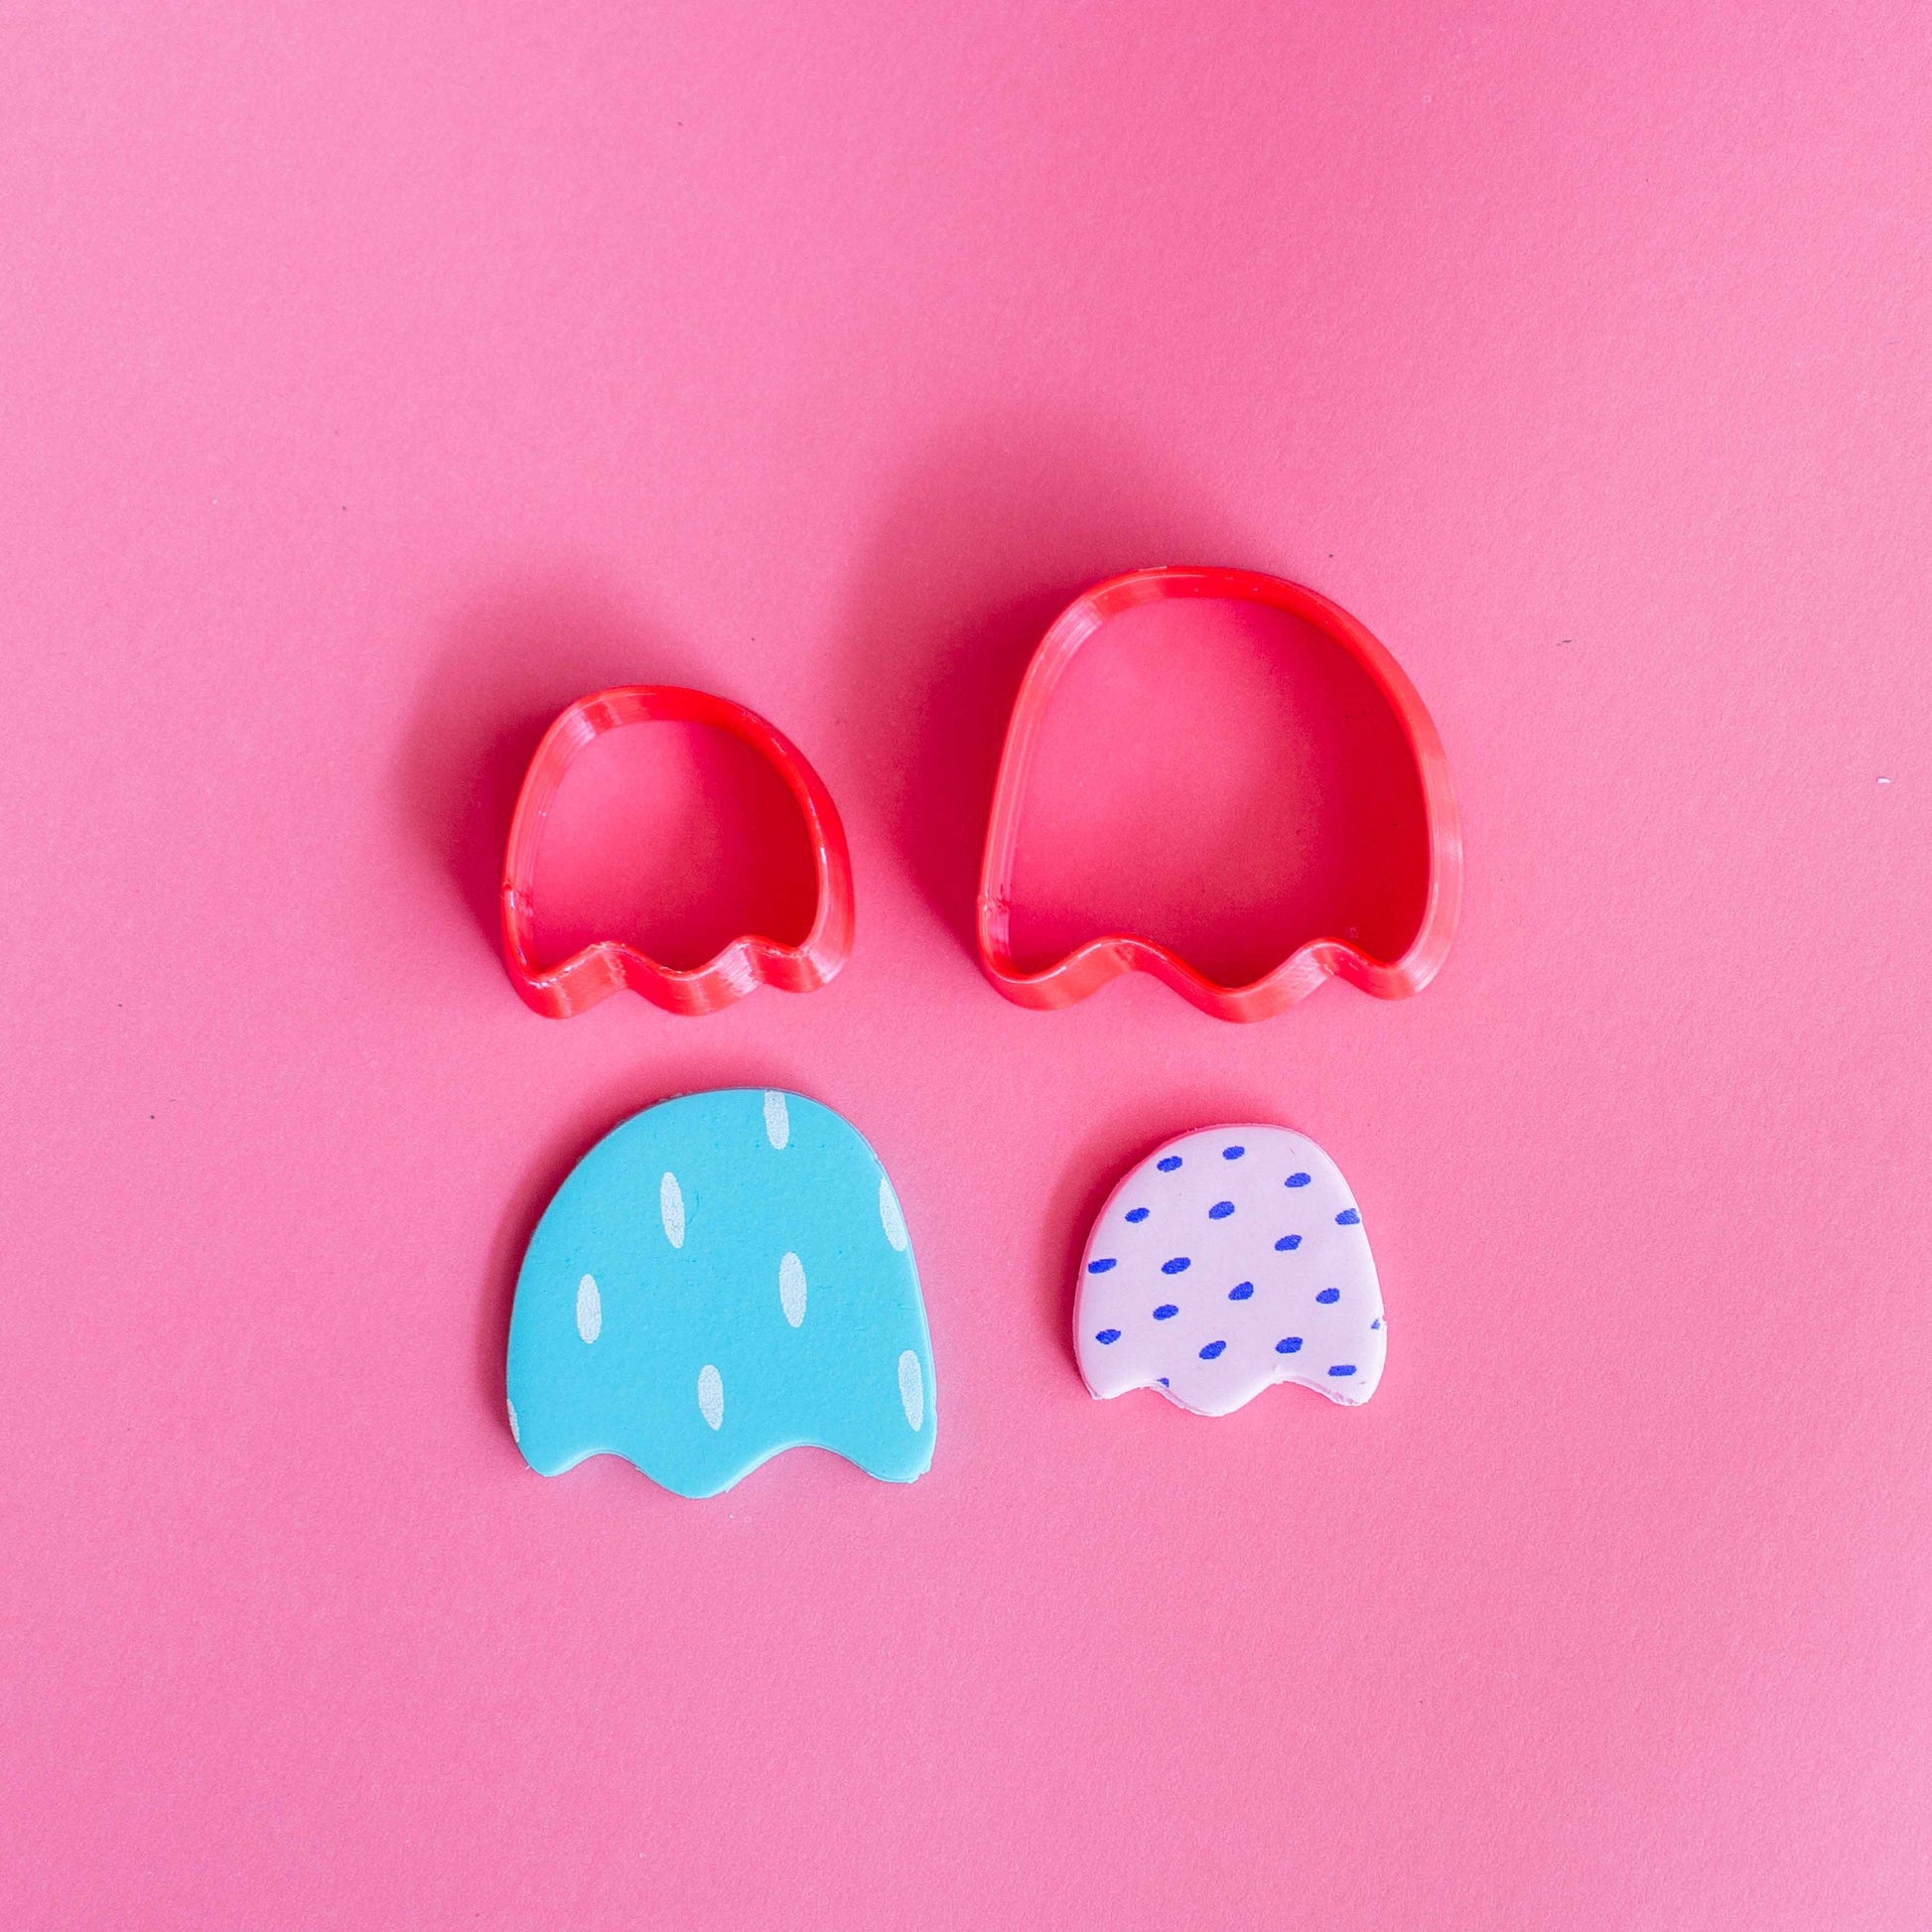 Small and big tulip polymer clay cutters together with two finished pieces of tulip polymer clay earrings on a pink background.